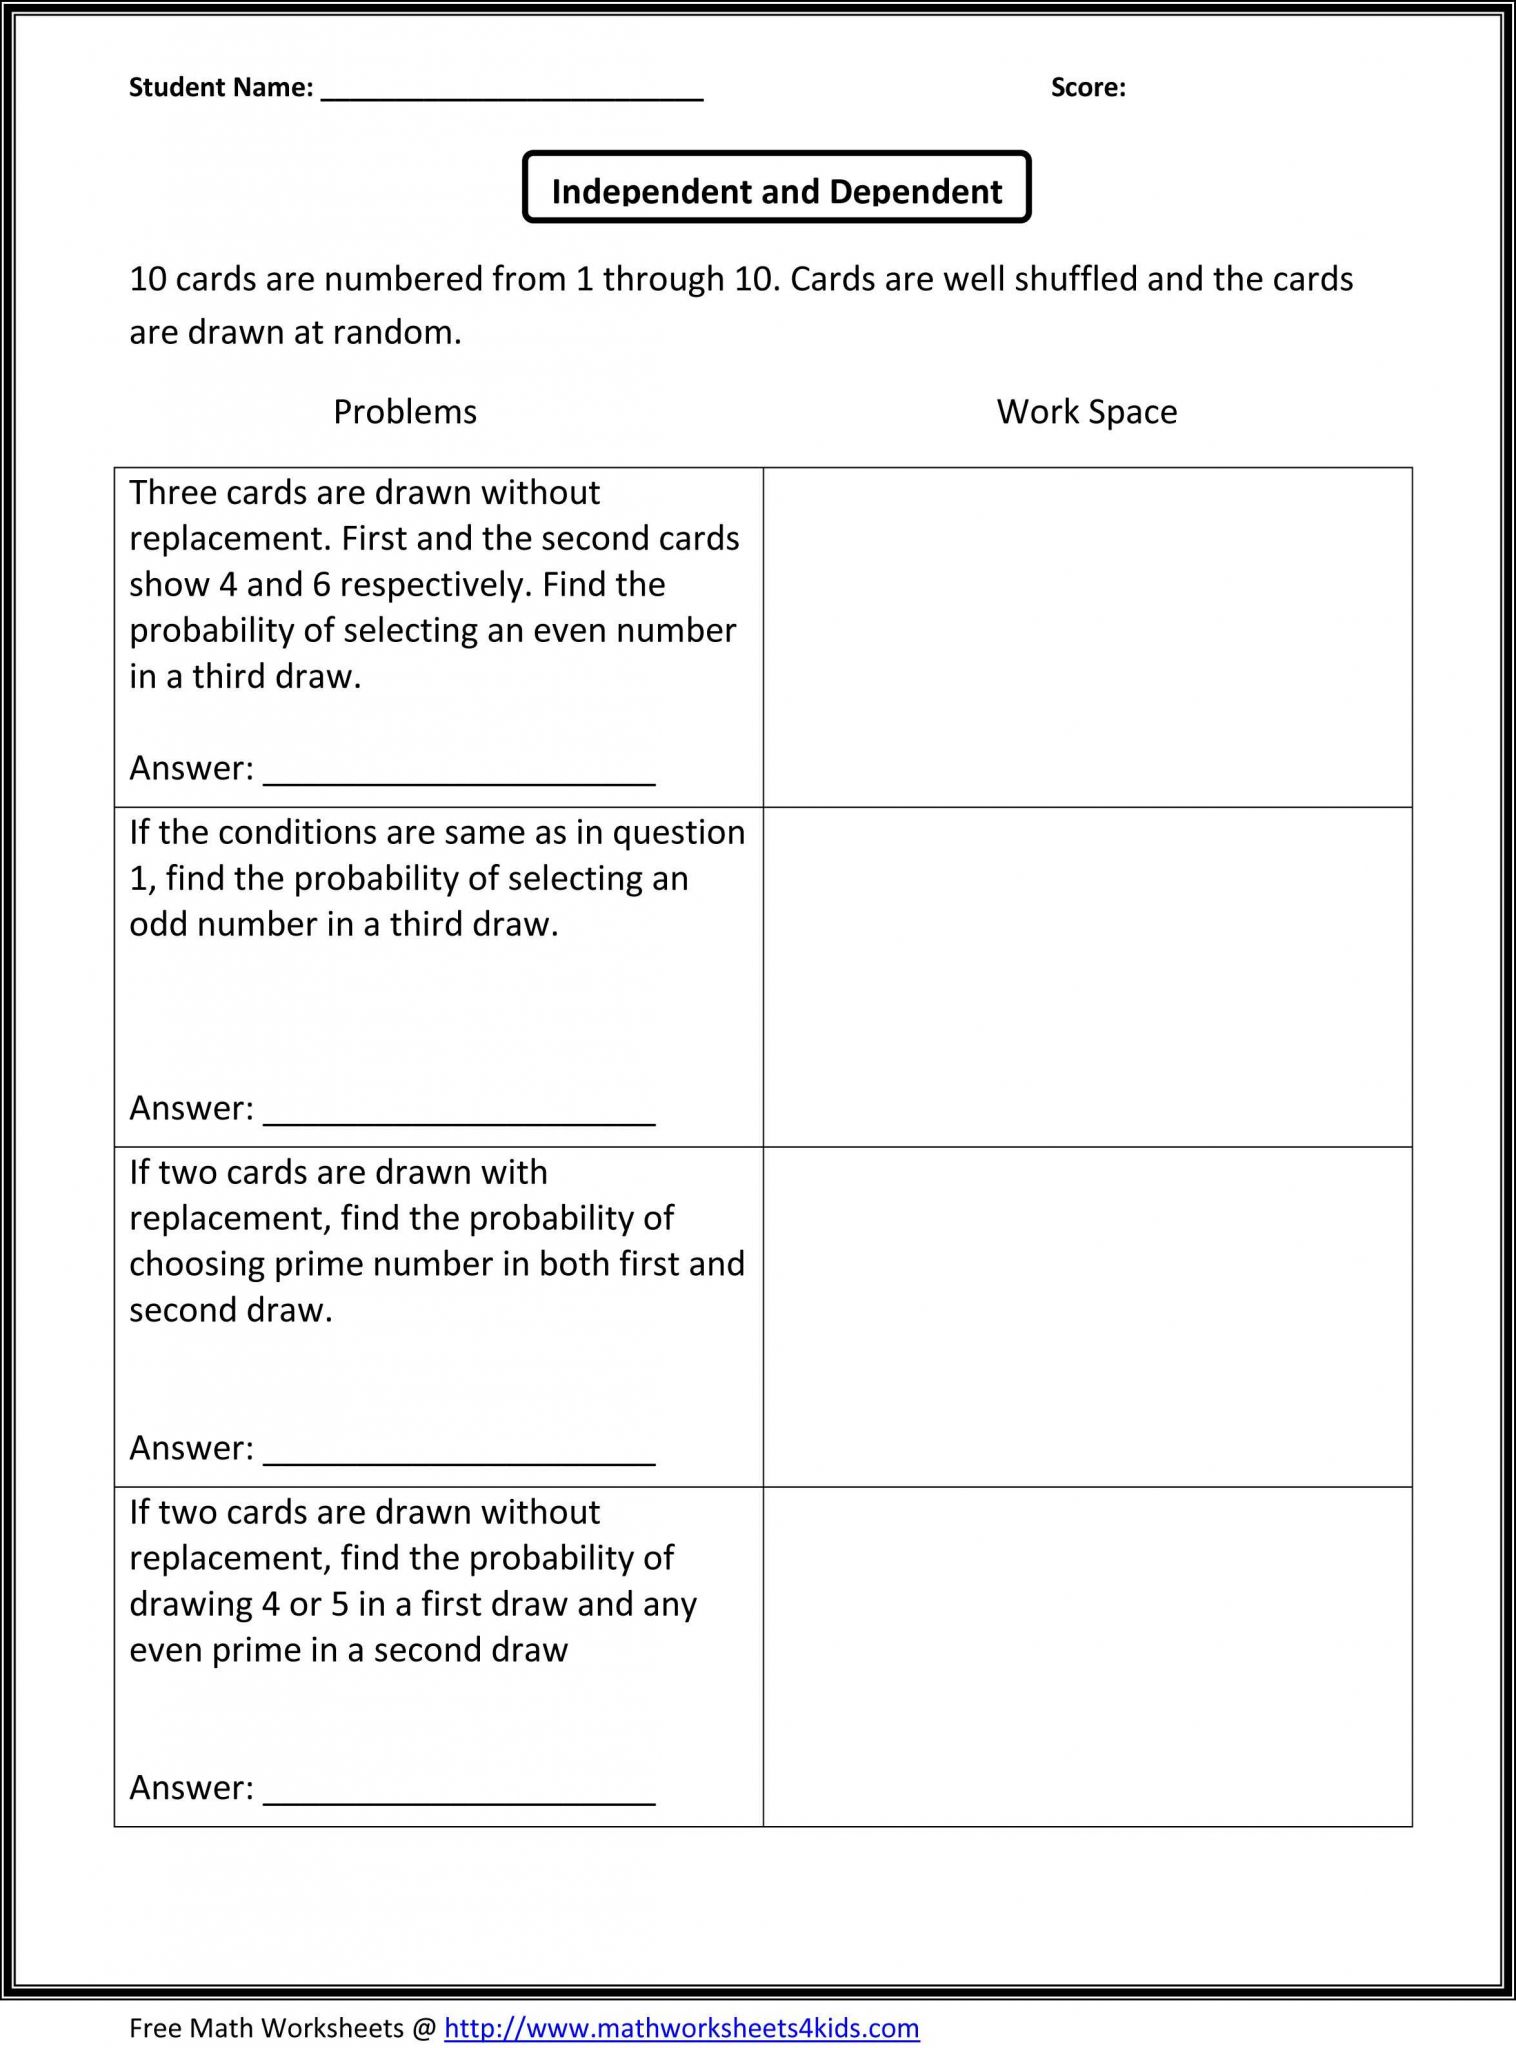 Scale Drawings Worksheet 7th Grade as Well as School Worksheets 7th Grade Questions the Best Worksheets Image